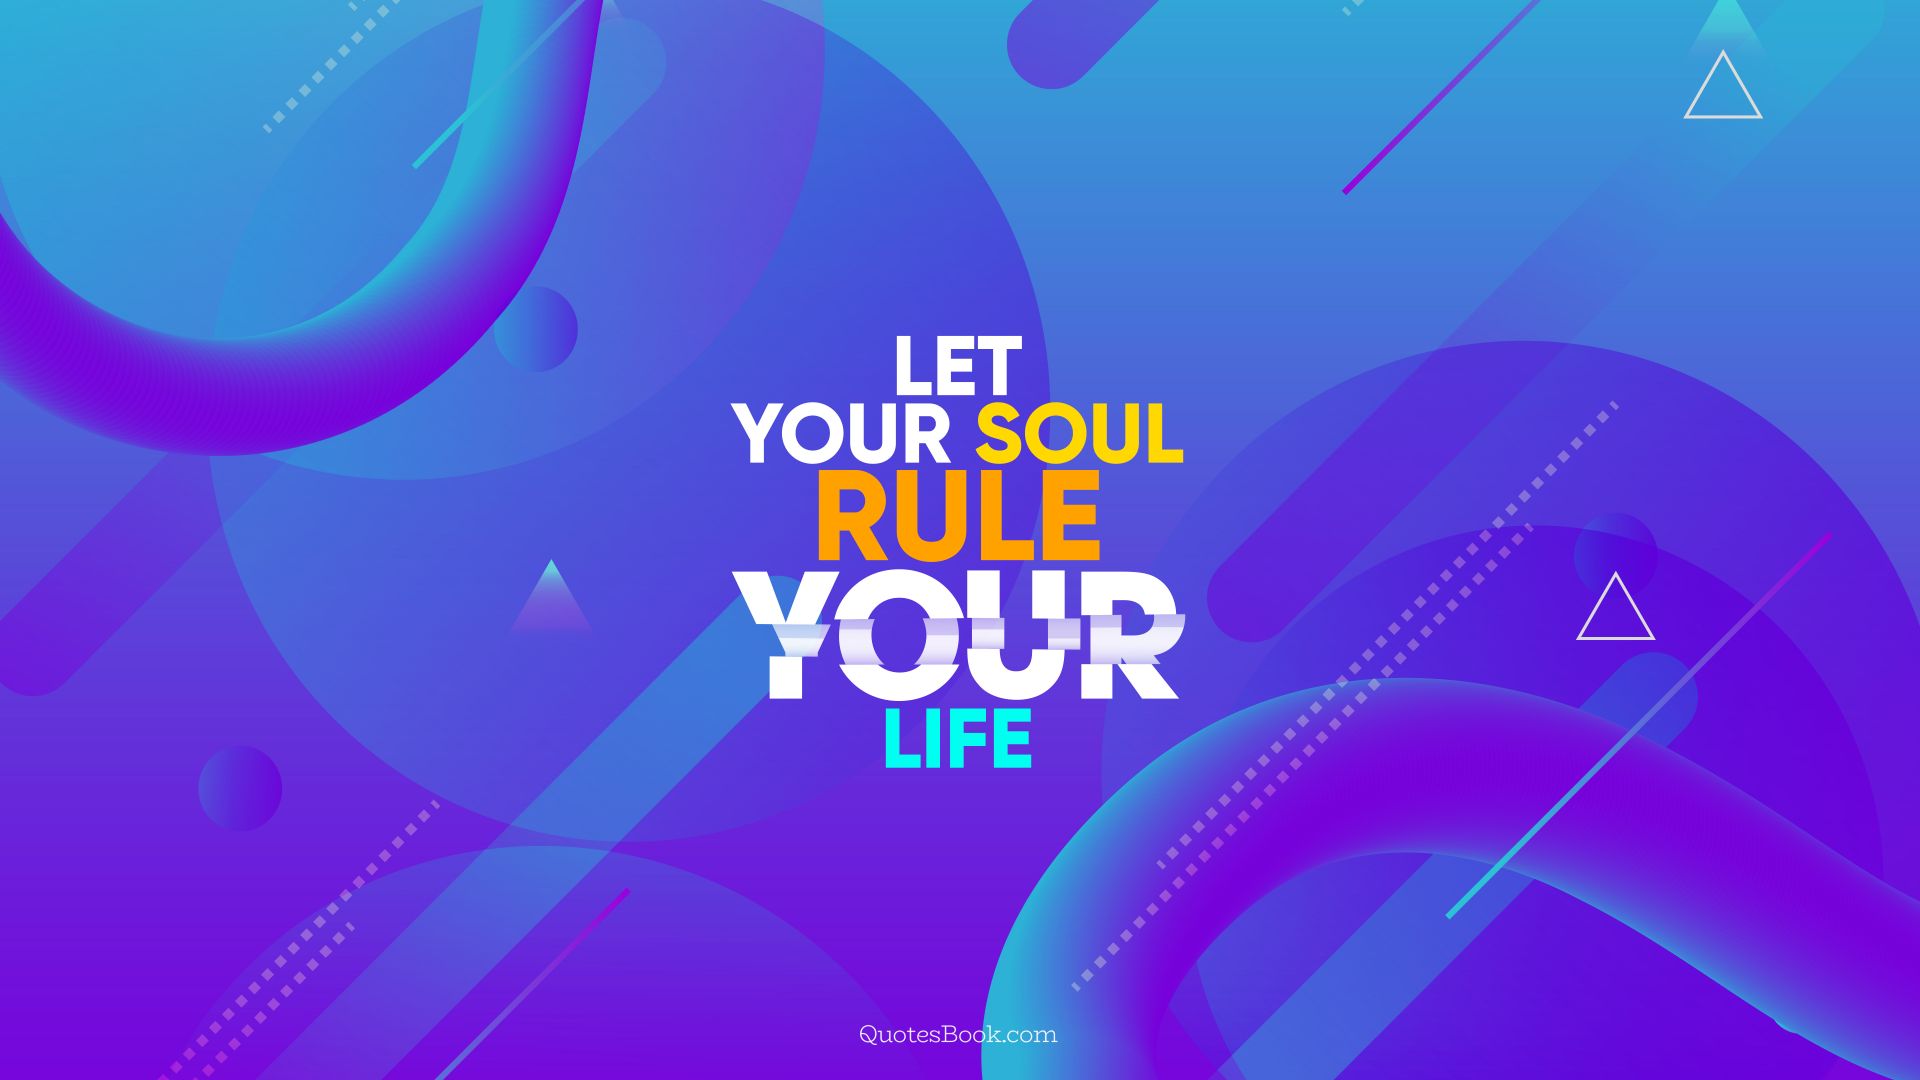 Let your soul rule your life